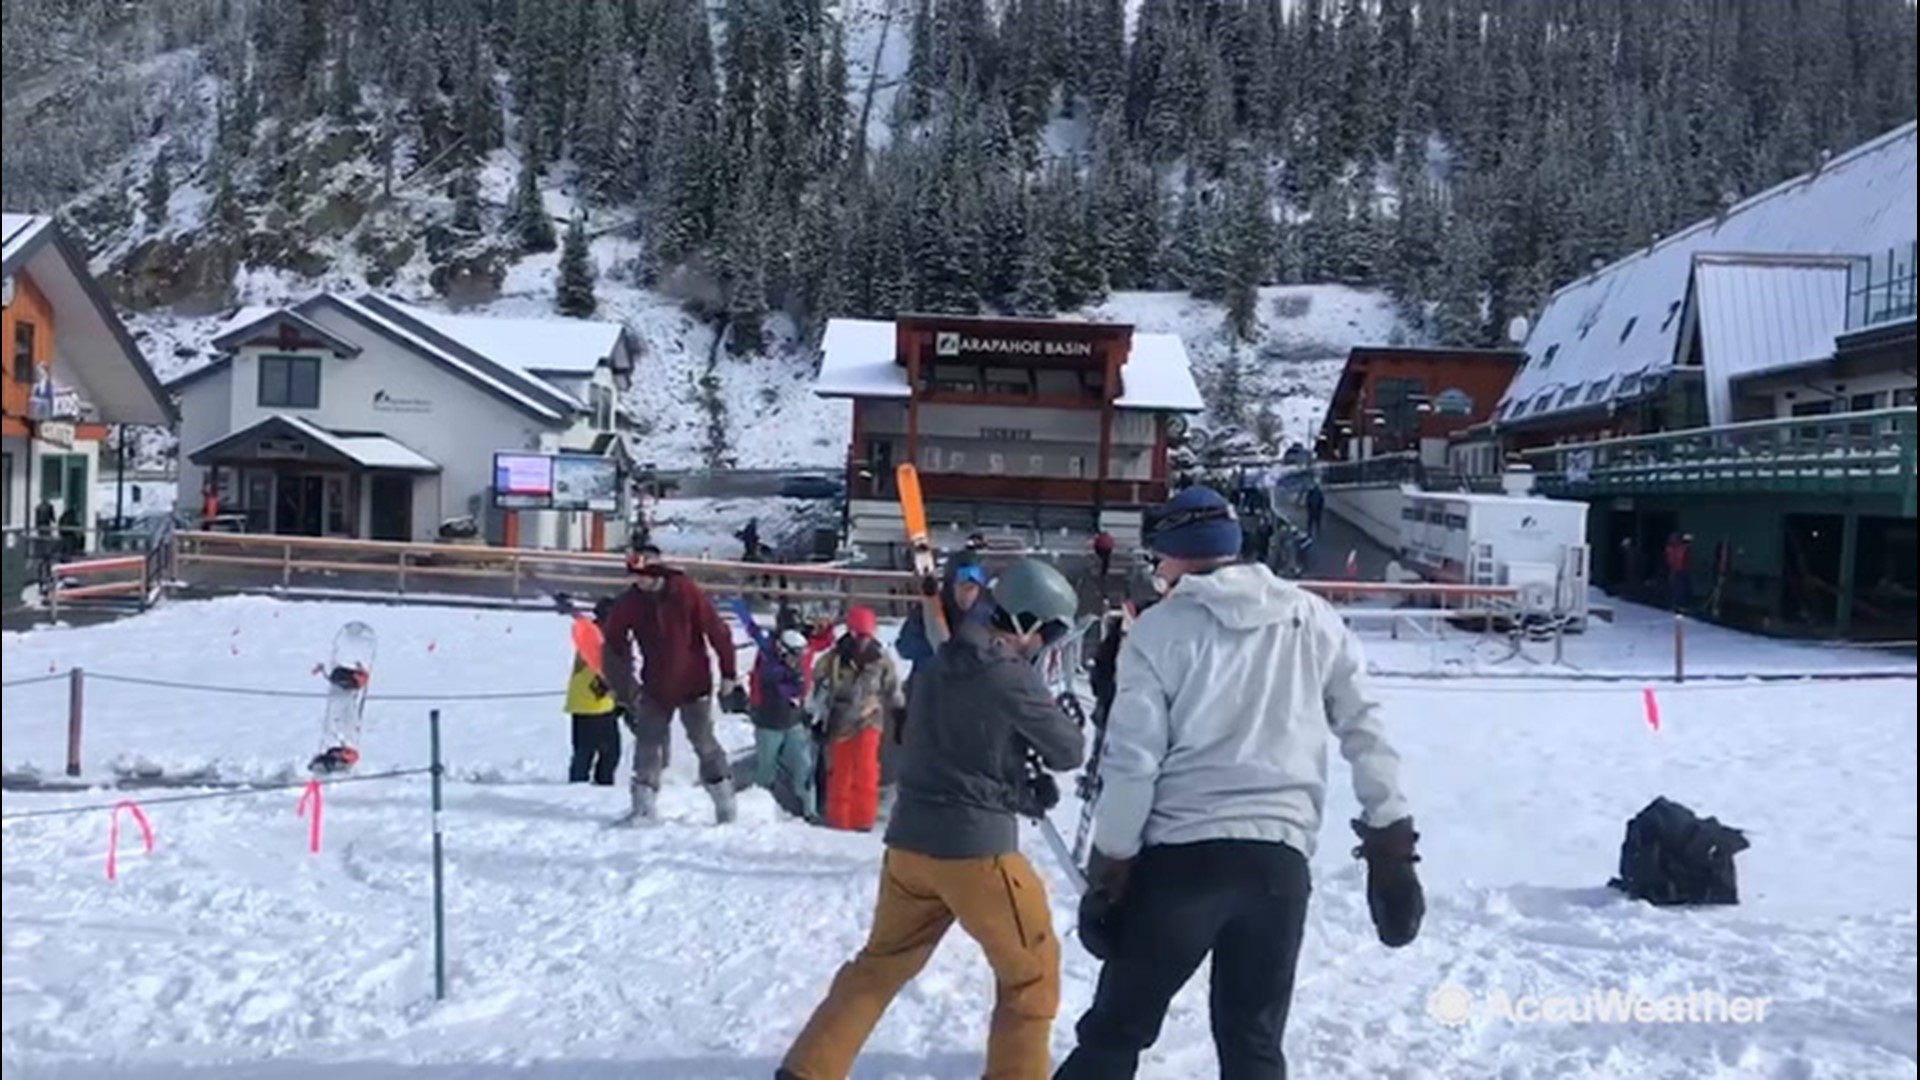 While the rest of America is enjoying the perks of a new season, people in Colorado are enjoying the fresh snow. Many in the area are using this Saturday (6/22) as a day to hit the slopes on some fresh fallen summer snow.